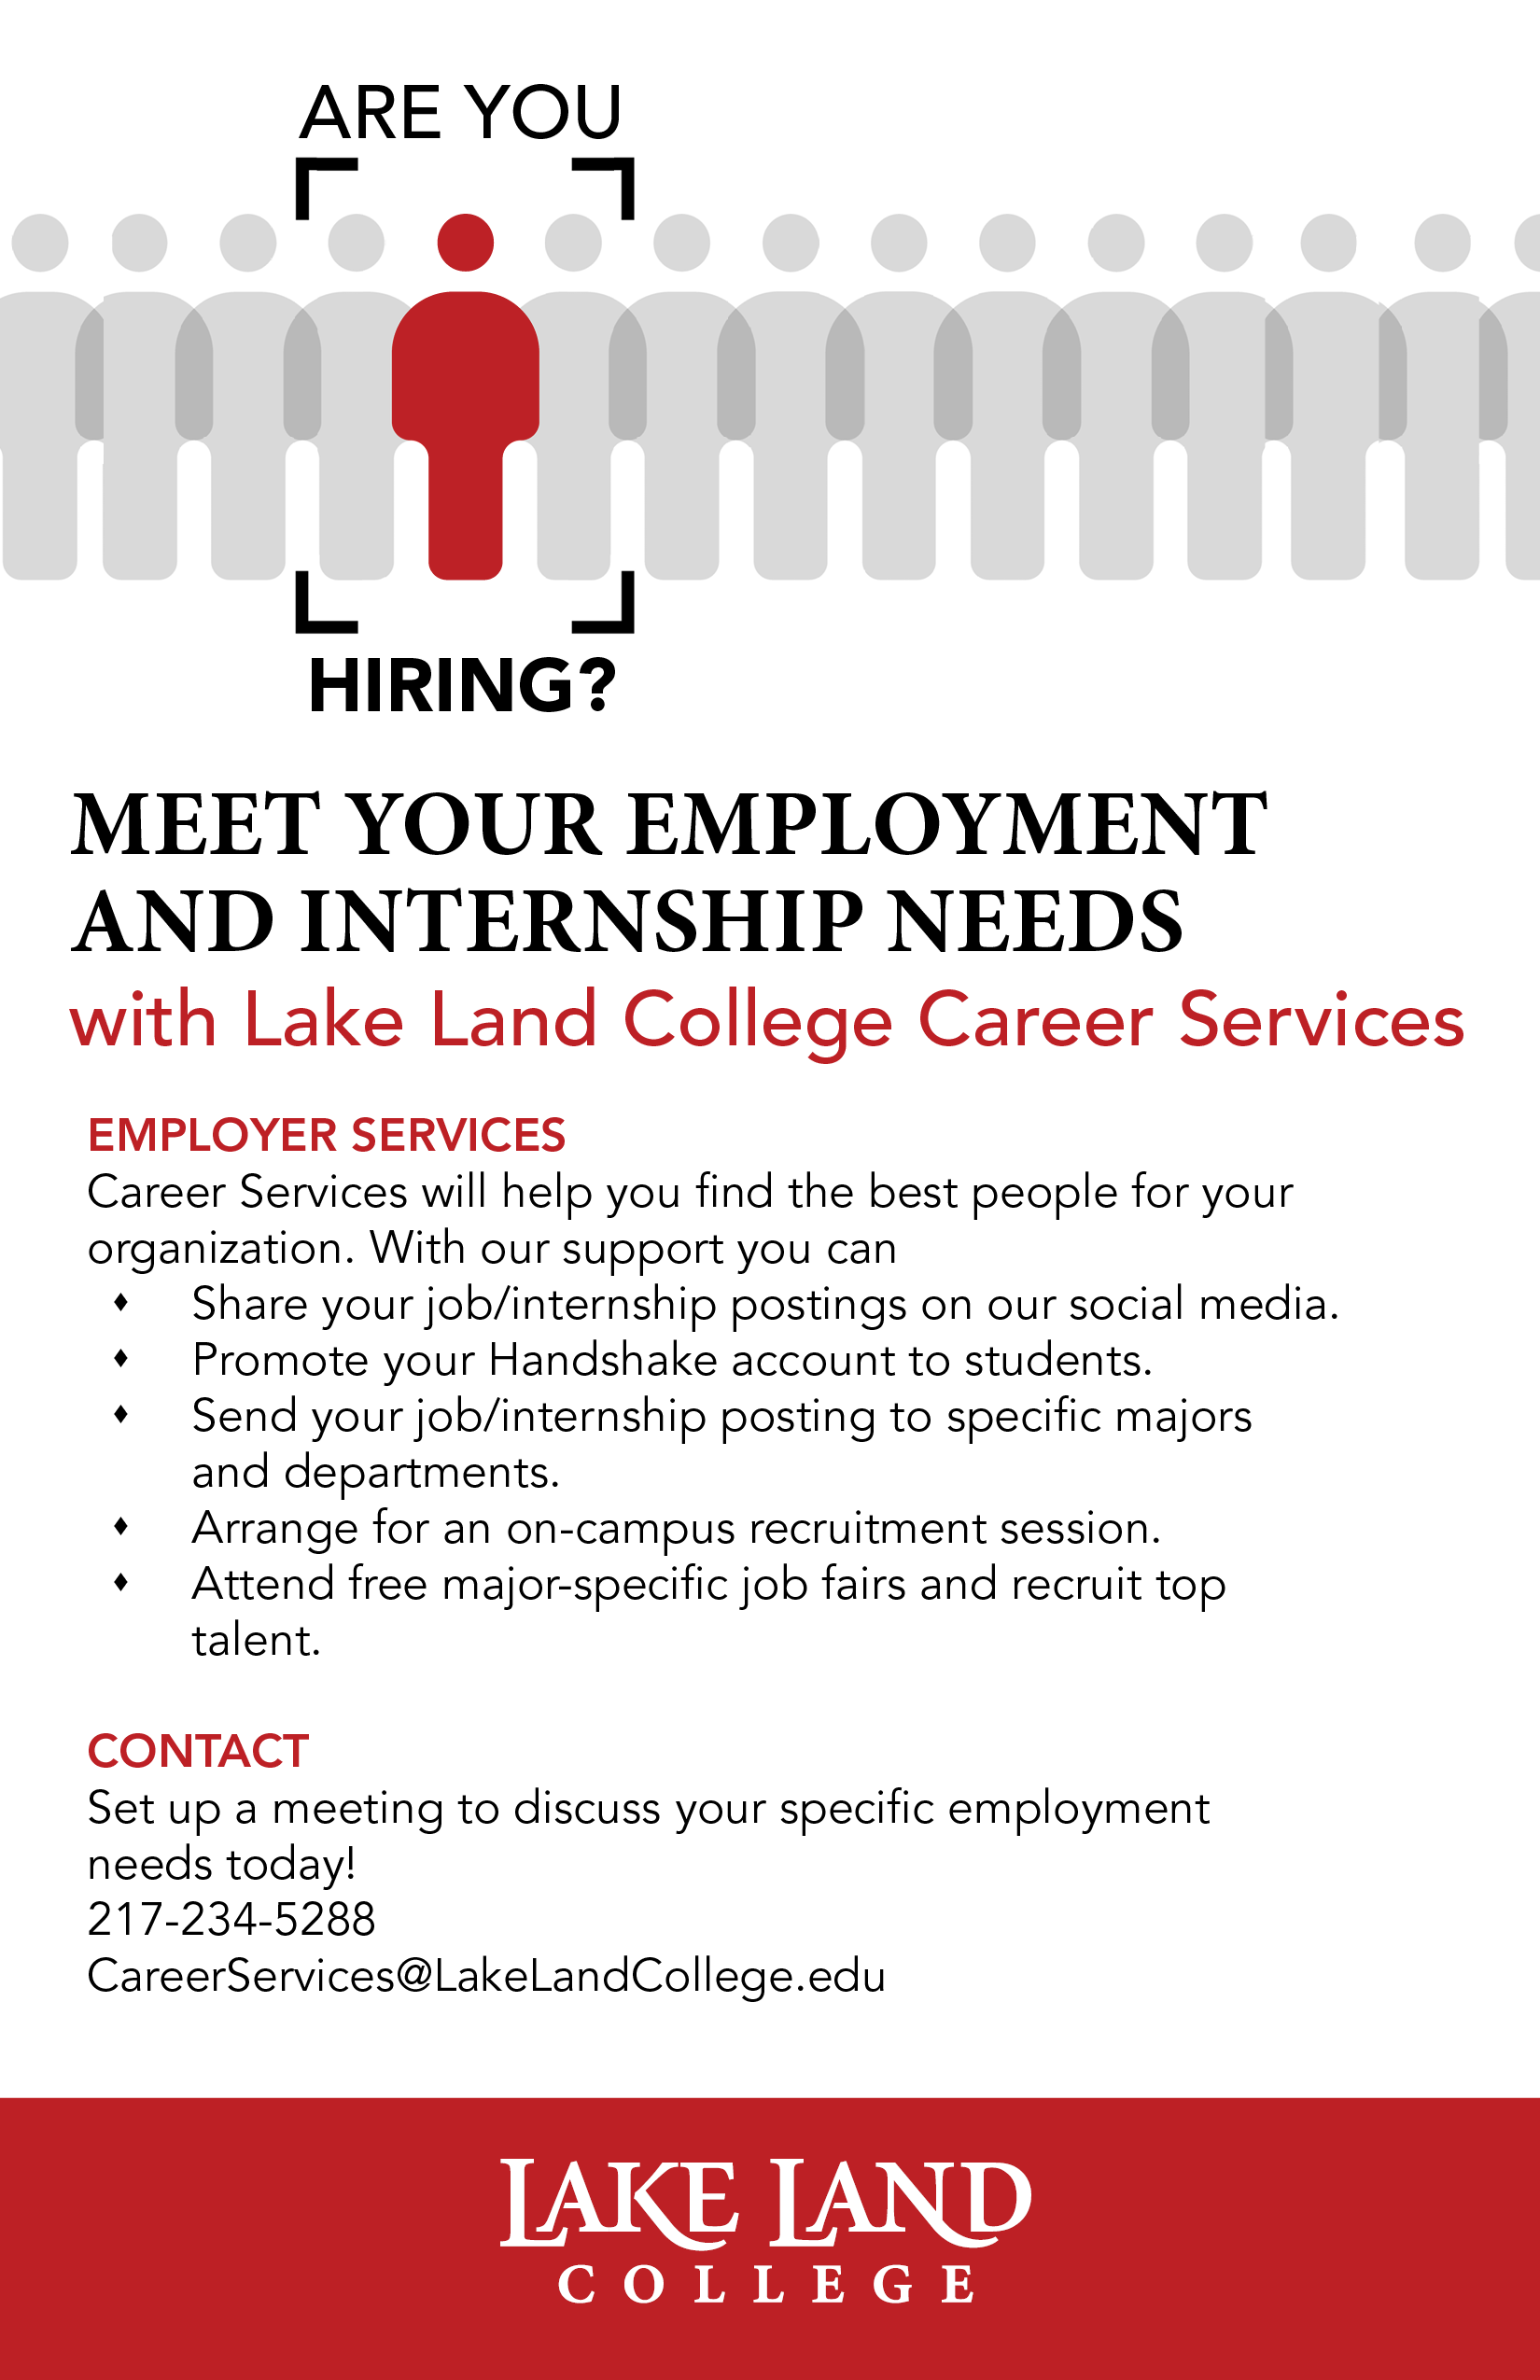 Employer flyer for career services at Lake Land